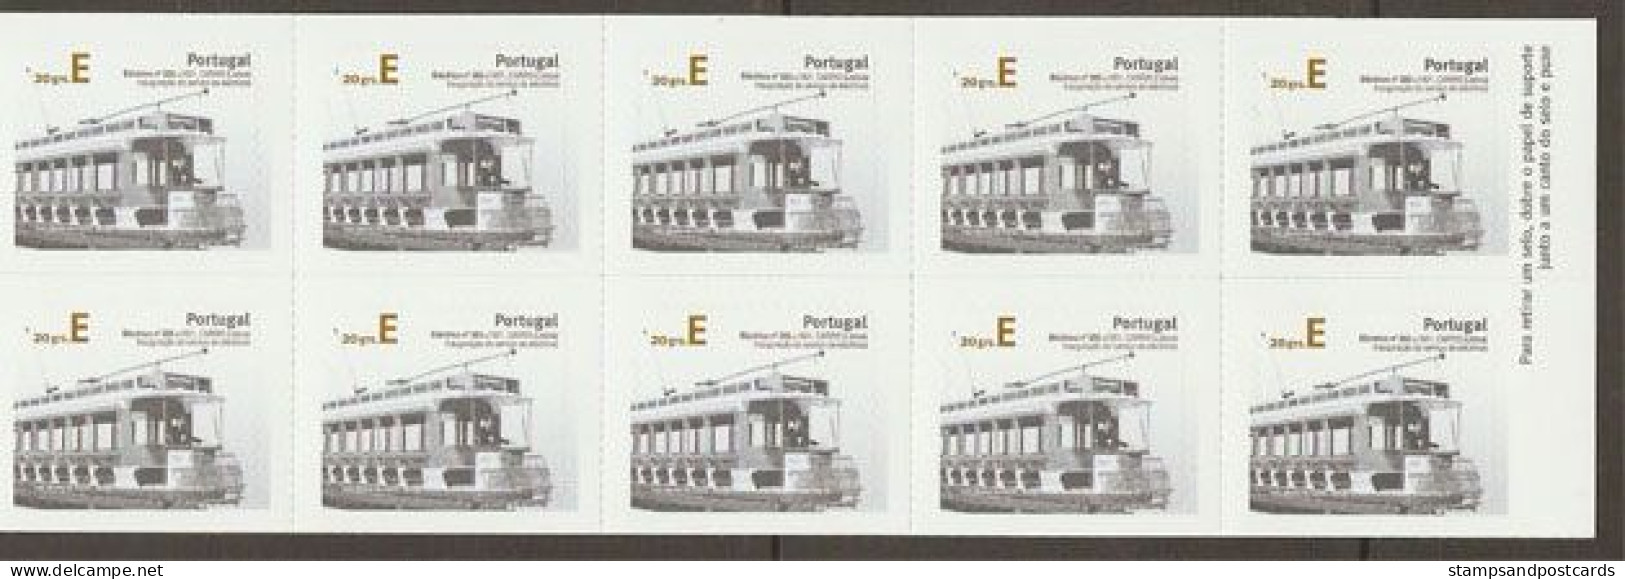 Portugal Carnet Autocollant 2007 Tram 1901 Carris Lisboa 50 Timbres Sticker Stamp Booklet Lisbon Tramway 50 Stamps *** - Tramways